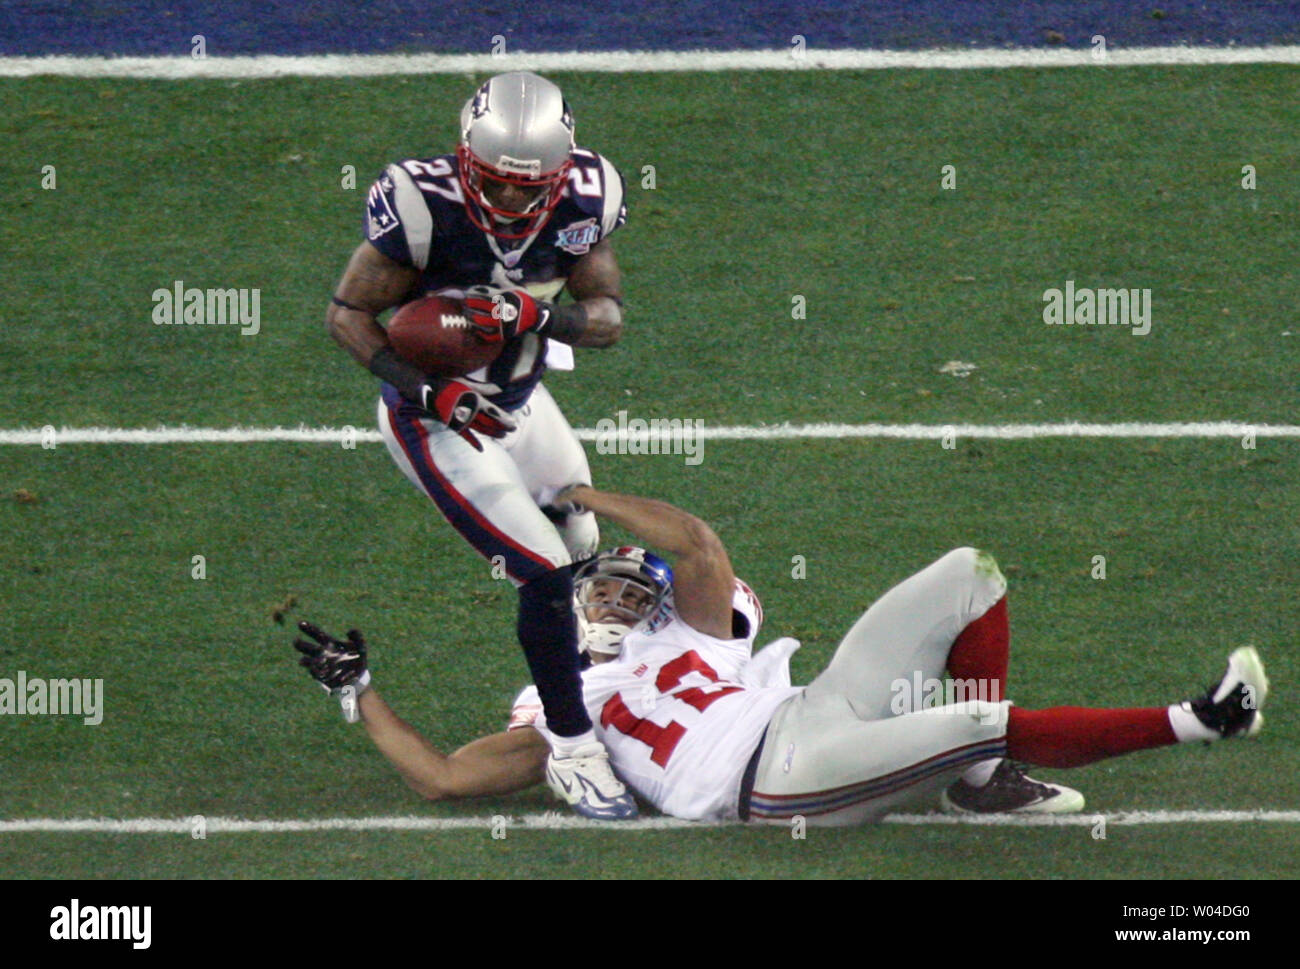 New England Patriots cornerback Ellis Hobbs III (L) intercepts a pass intended for New York Giants wide receiver Steve Smith (12) in the second quarter during Super Bowl XLII at University of Phoenix Stadium in Glendale, Arizona on February 3, 2008. (UPI Photo/Art Foxall) Stock Photo